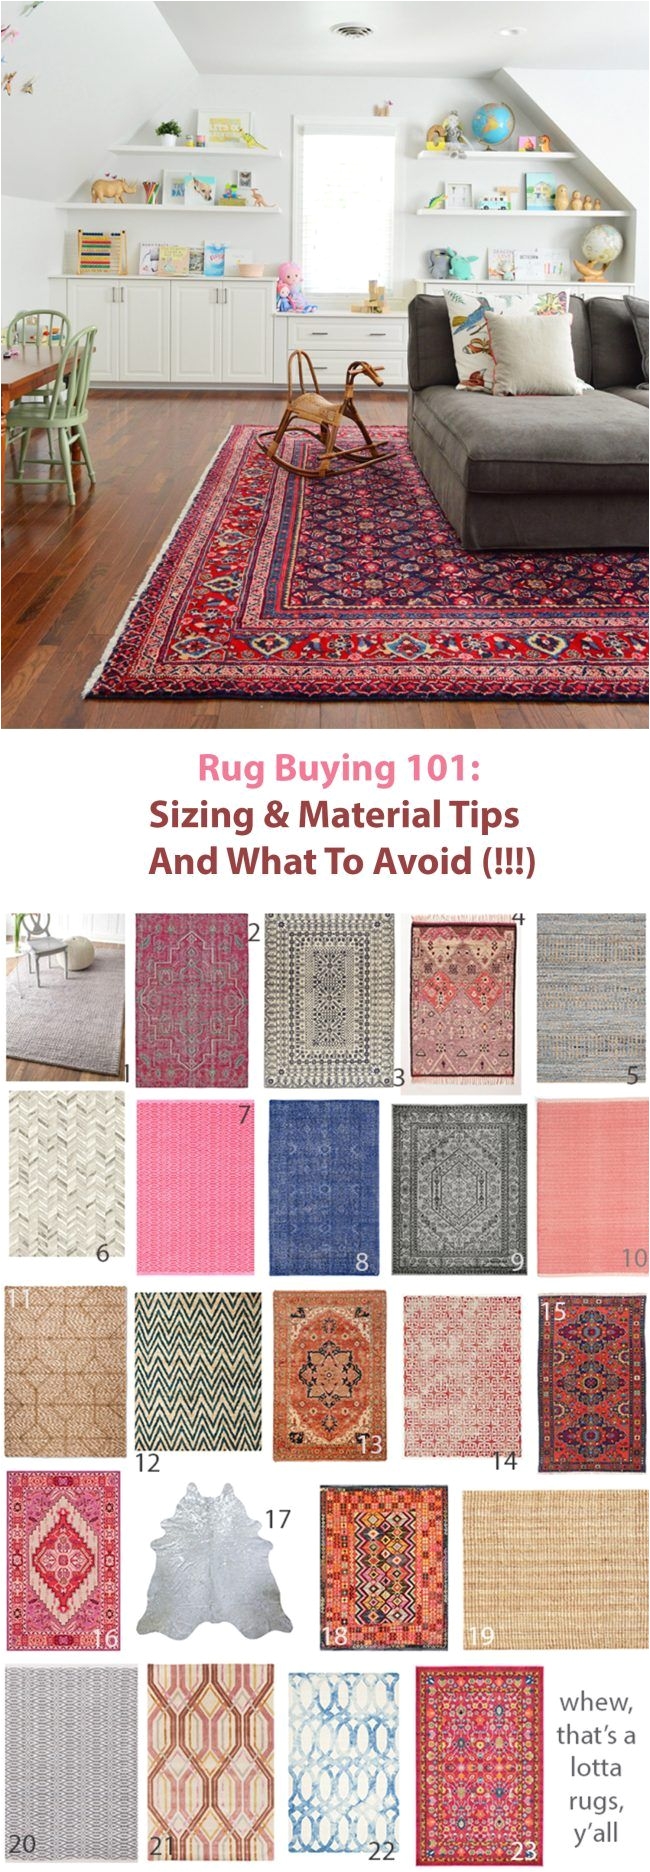 Aztec Print Rug Australia 3891 Best Rugs Images On Pinterest Rug Hooking Punch Needle and